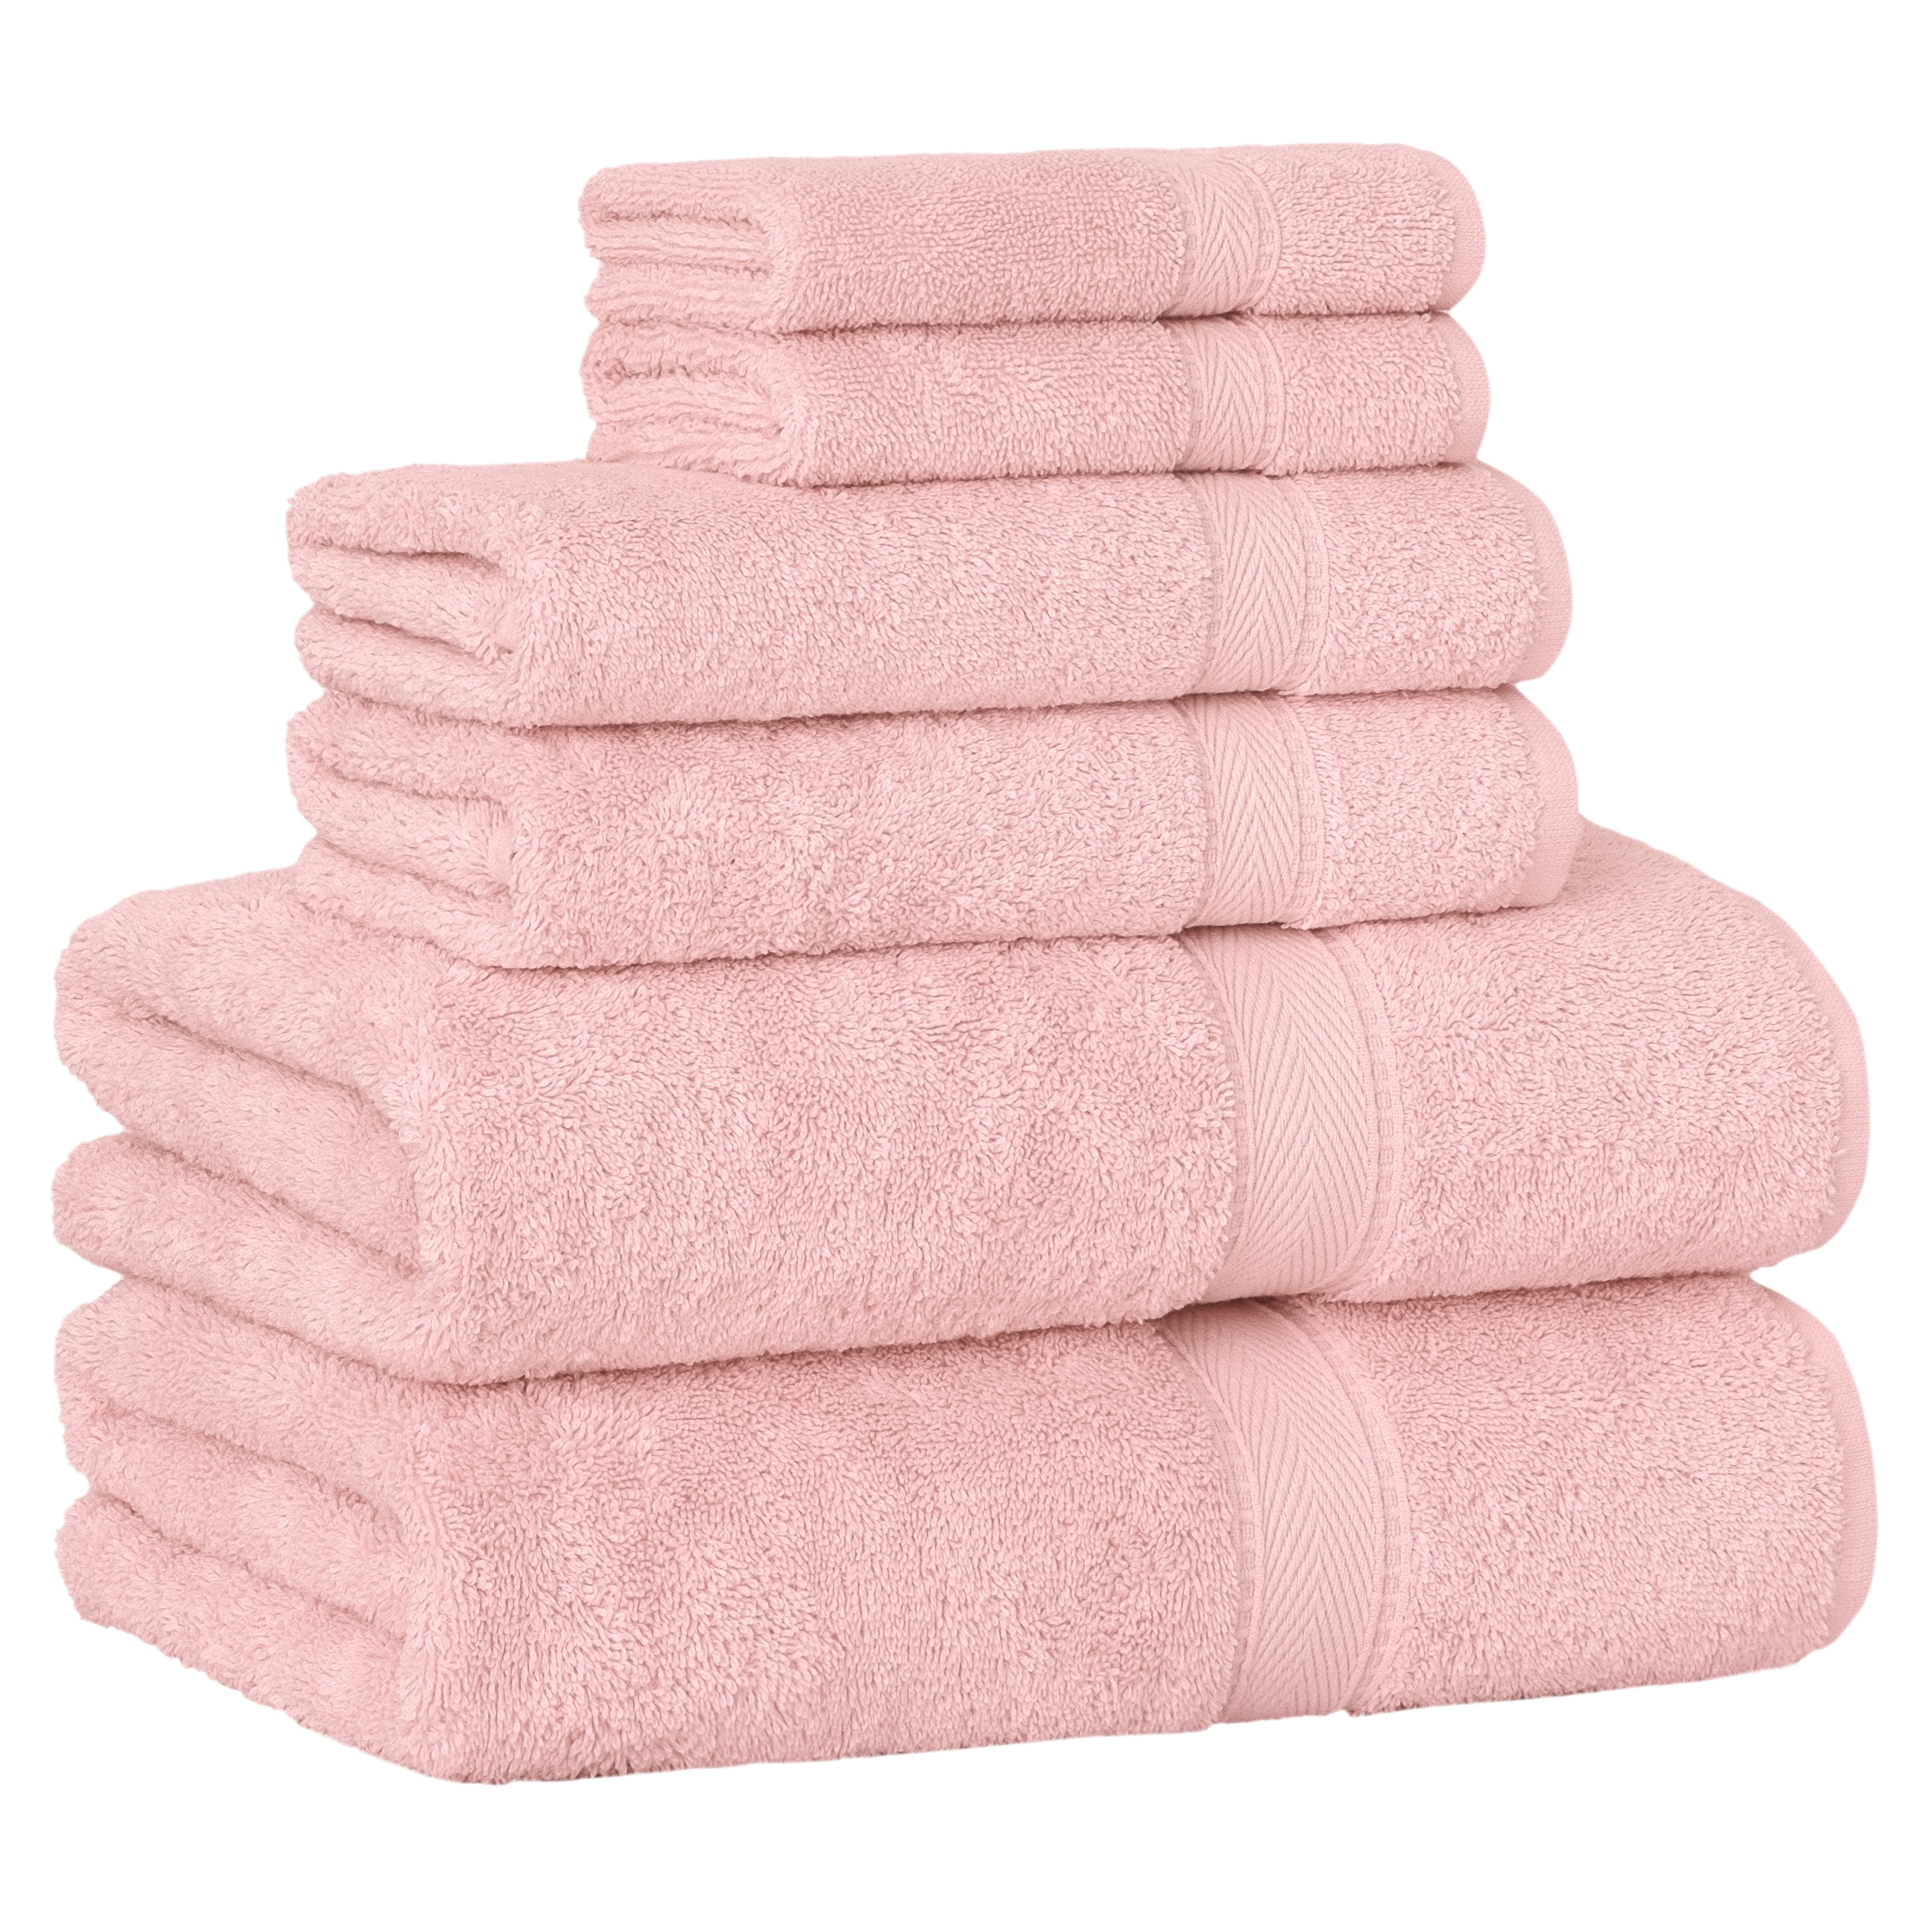 https://ak1.ostkcdn.com/images/products/is/images/direct/4462202e35ac1d8c34210ce8ab1f126b9a594afe/Authentic-Hotel-and-Spa-Turkish-Cotton-6-piece-Towel-Set.jpg